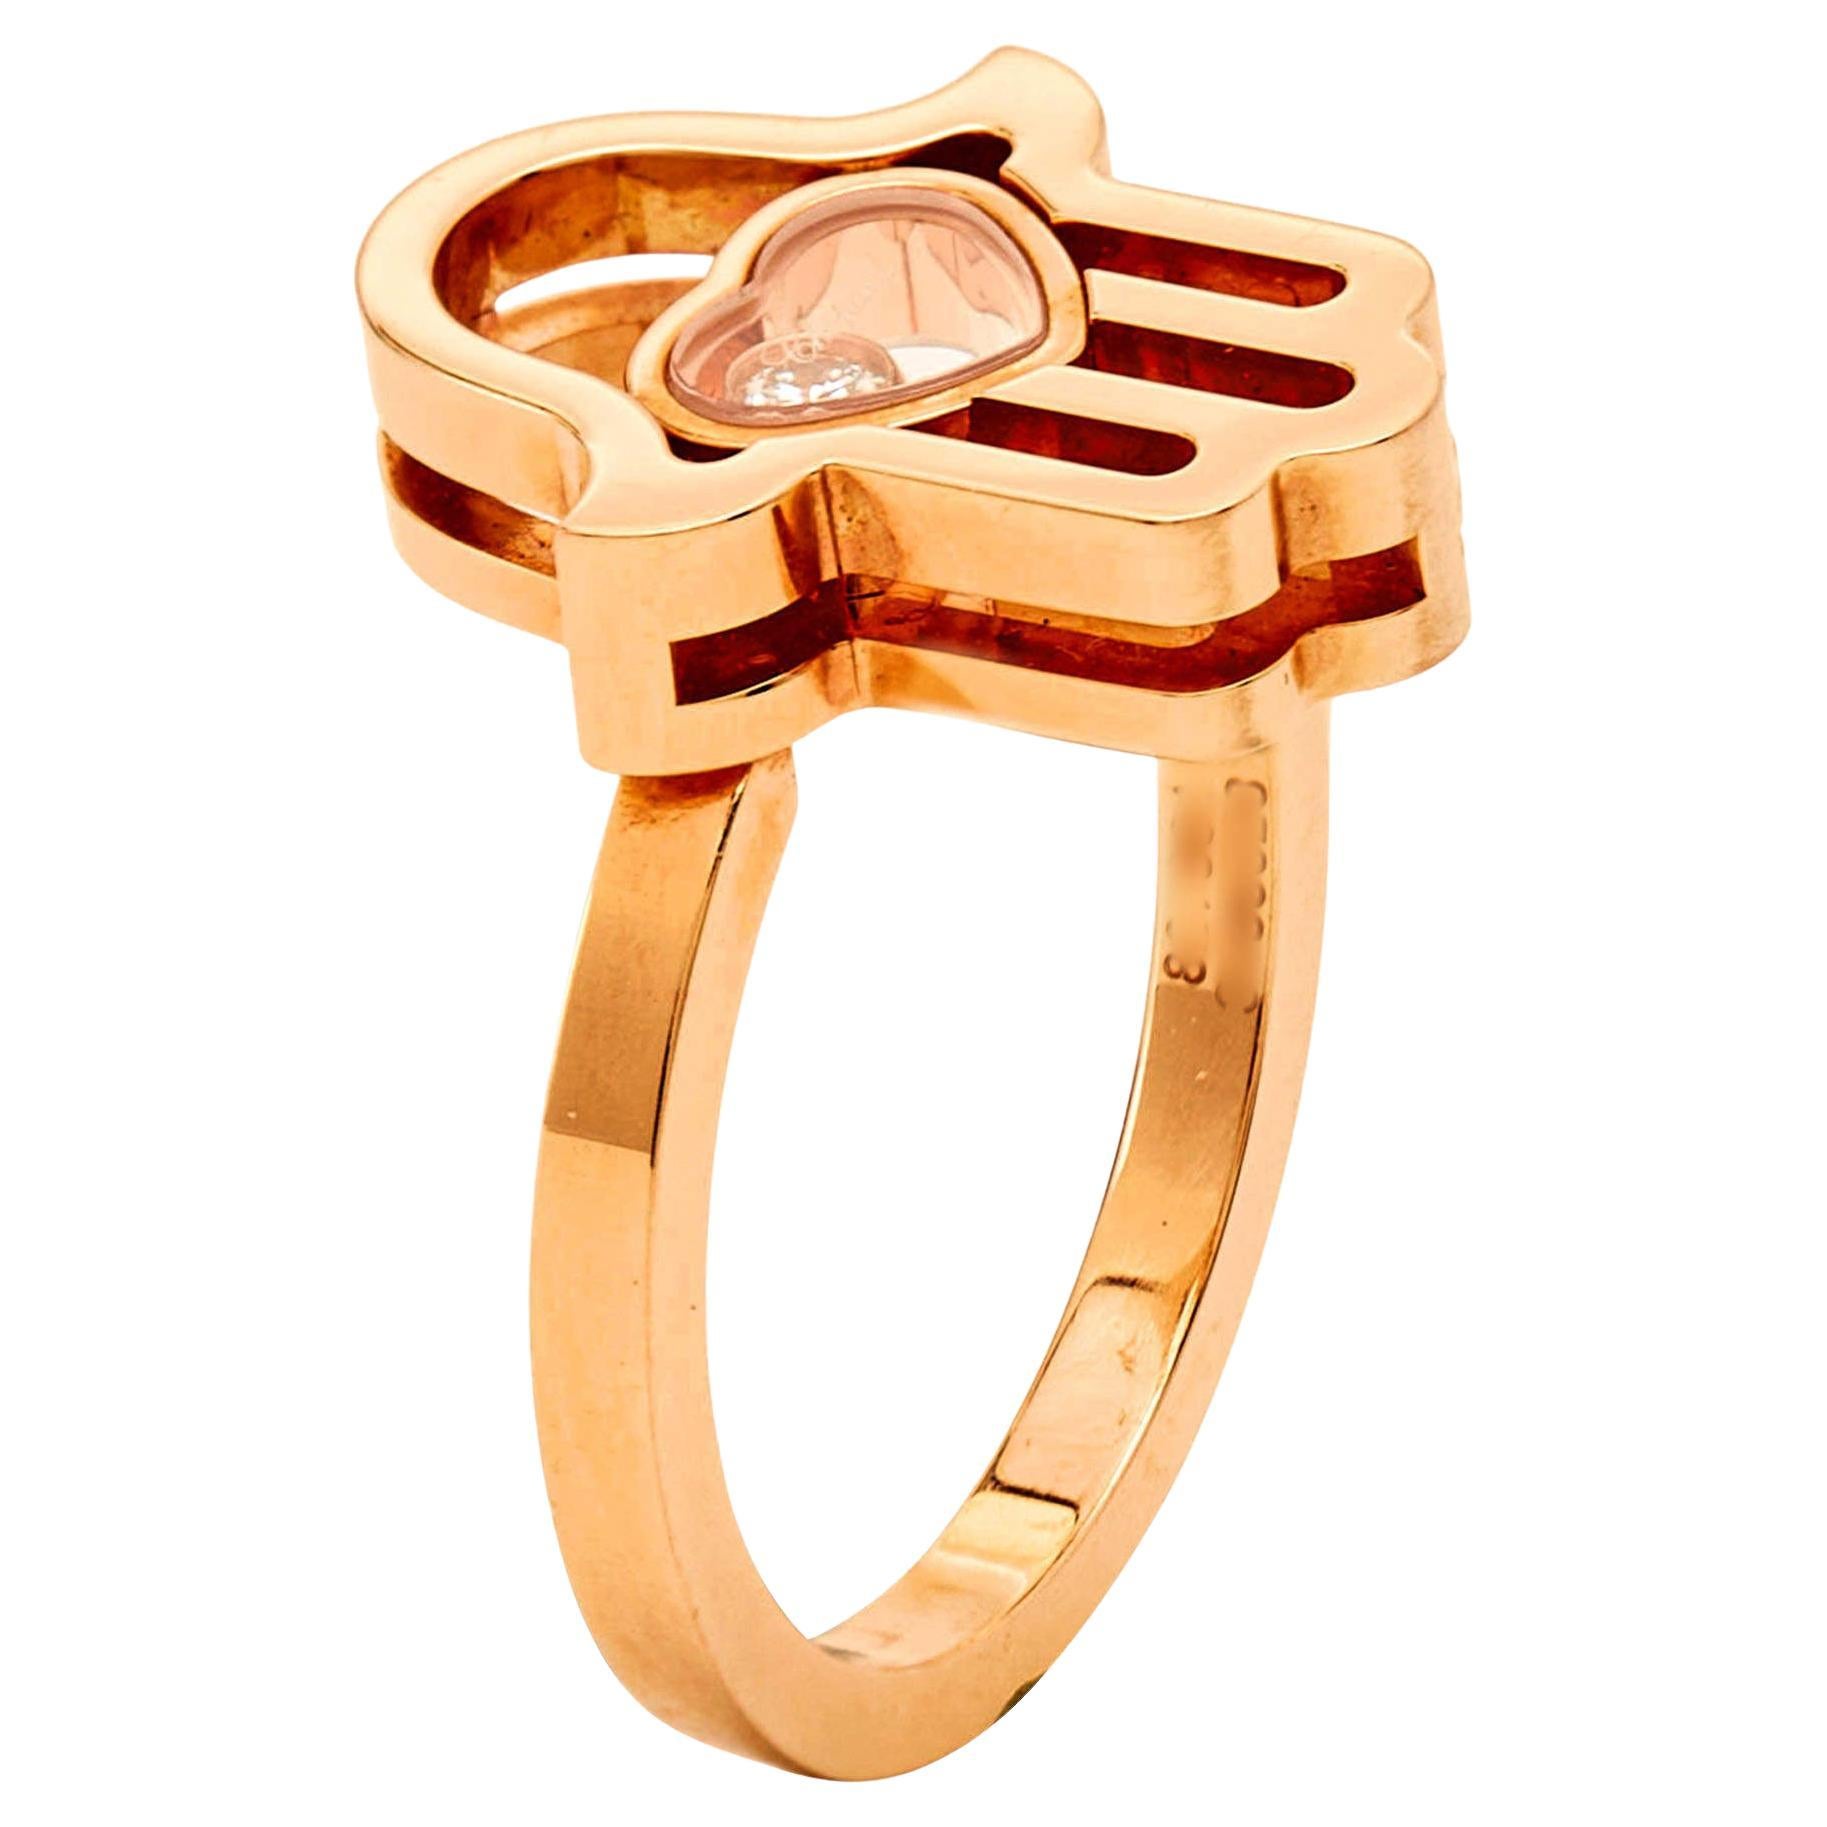 9ct ROSE GOLD HEART LATTICE BAND RING SIZE R for sale in Co. Louth for €120  on DoneDeal